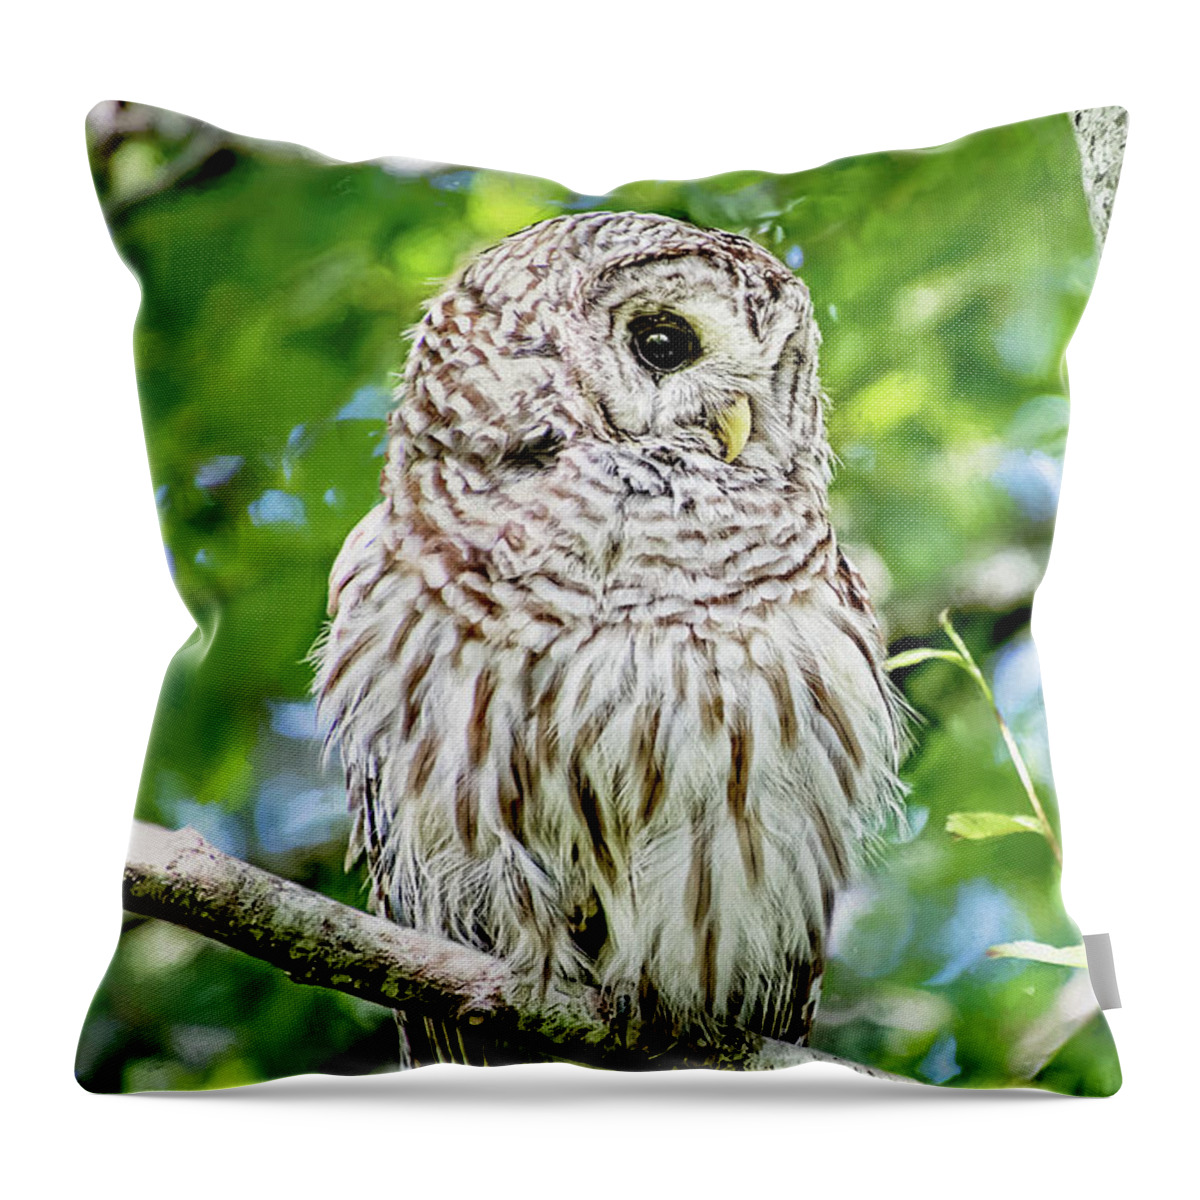 Owl Throw Pillow featuring the photograph Fledgling Hoot Owl by Peggy Collins